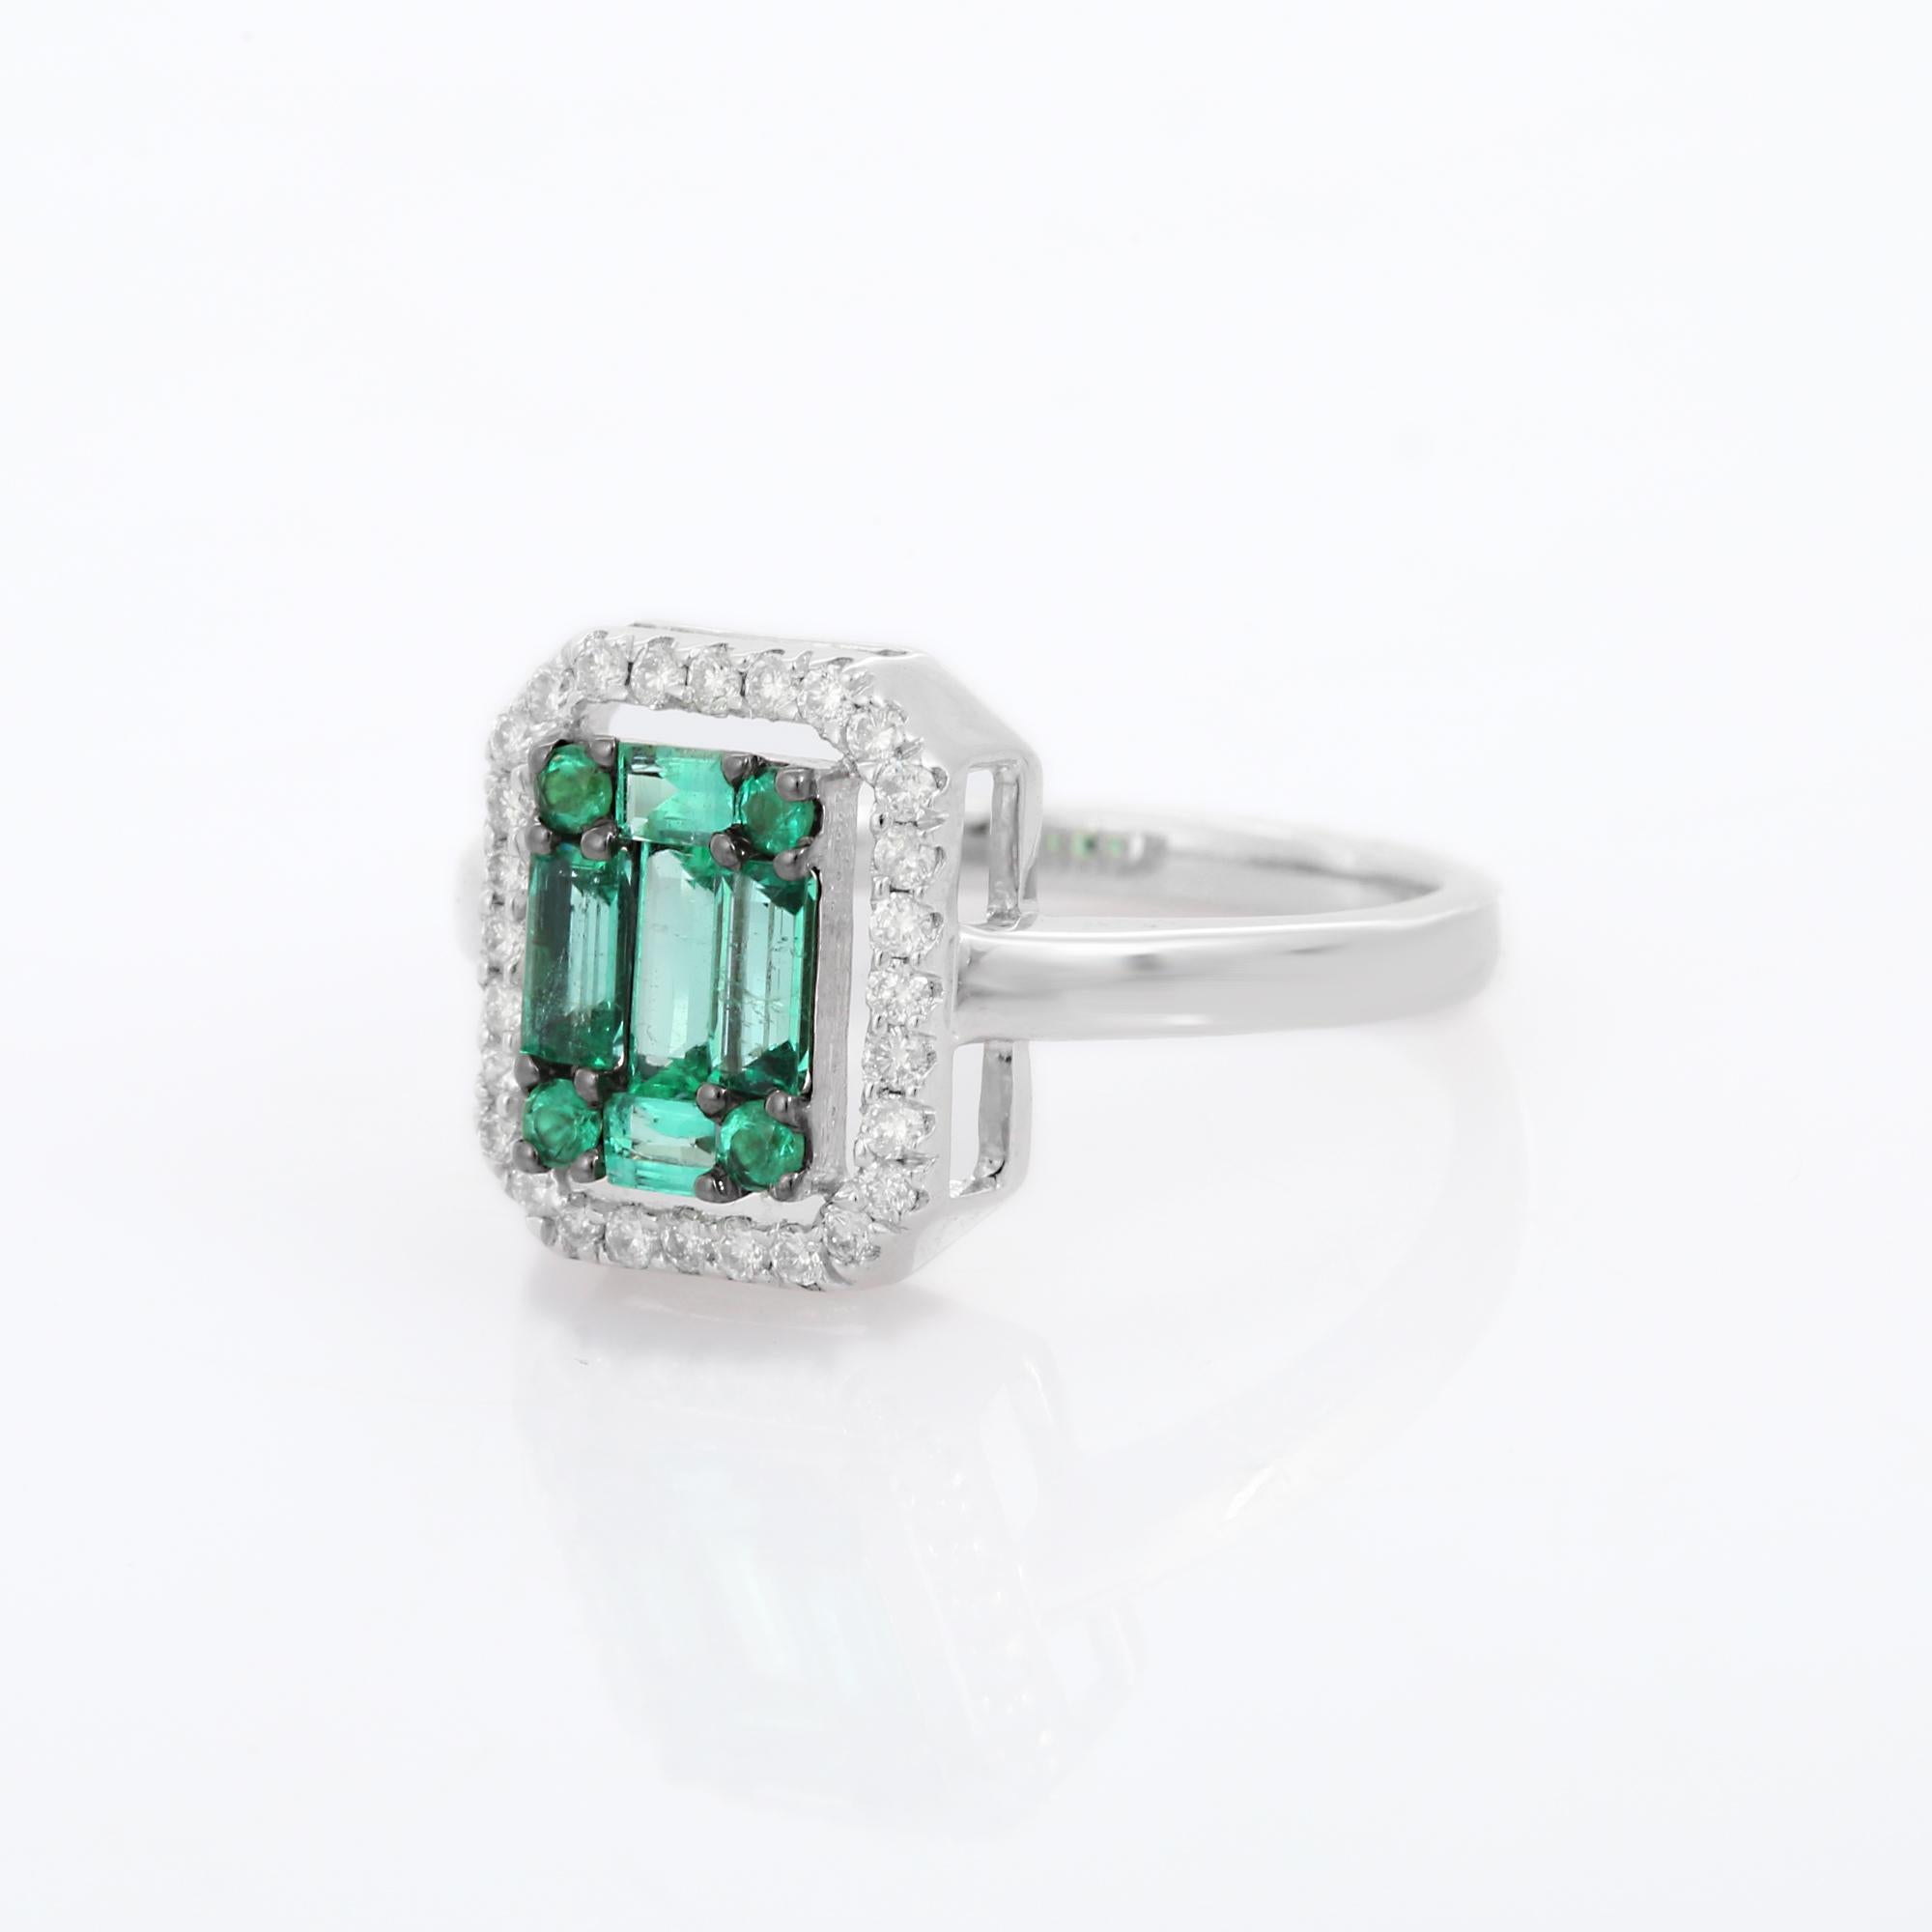 For Sale:  18k Solid White Gold Emerald Cluster Engagement Ring with Diamonds 3